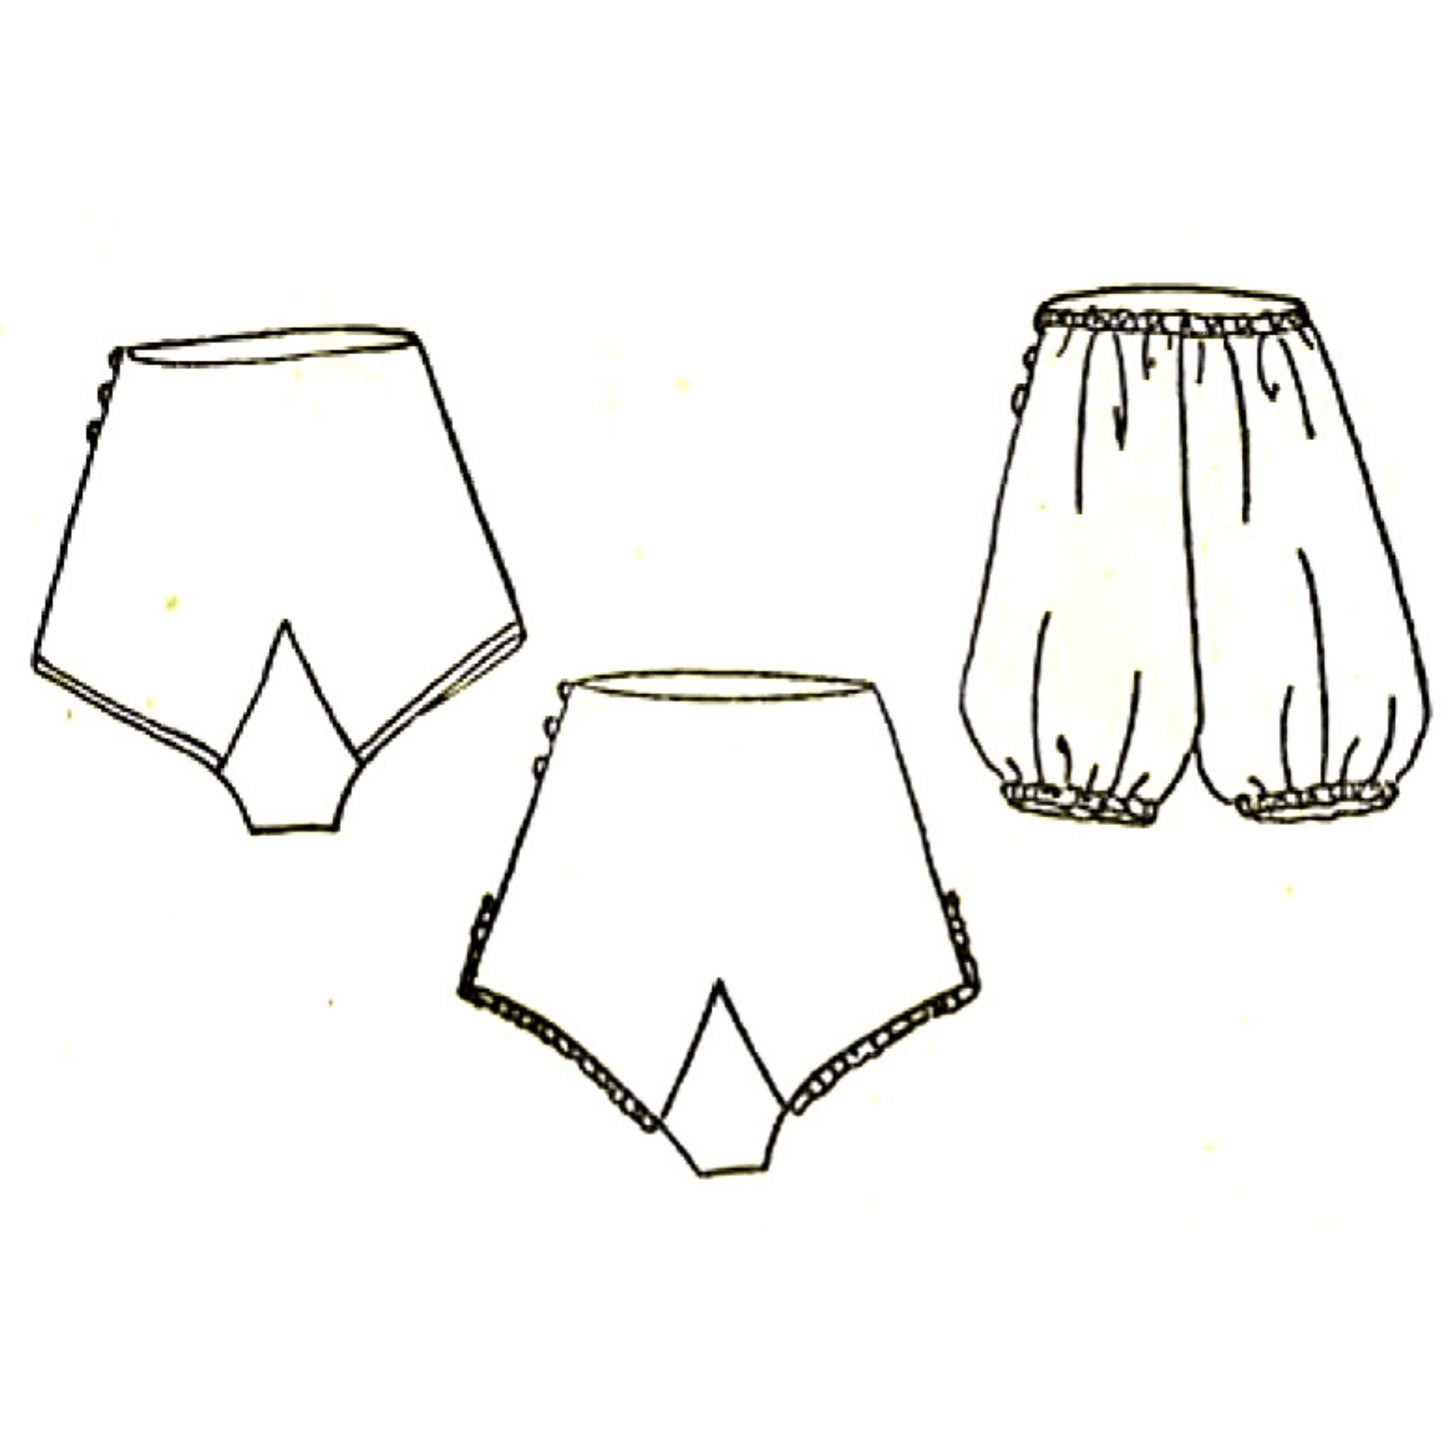 1940s vintage Simplicity sewing pattern for lingerie, tap pants panties or  bloomers